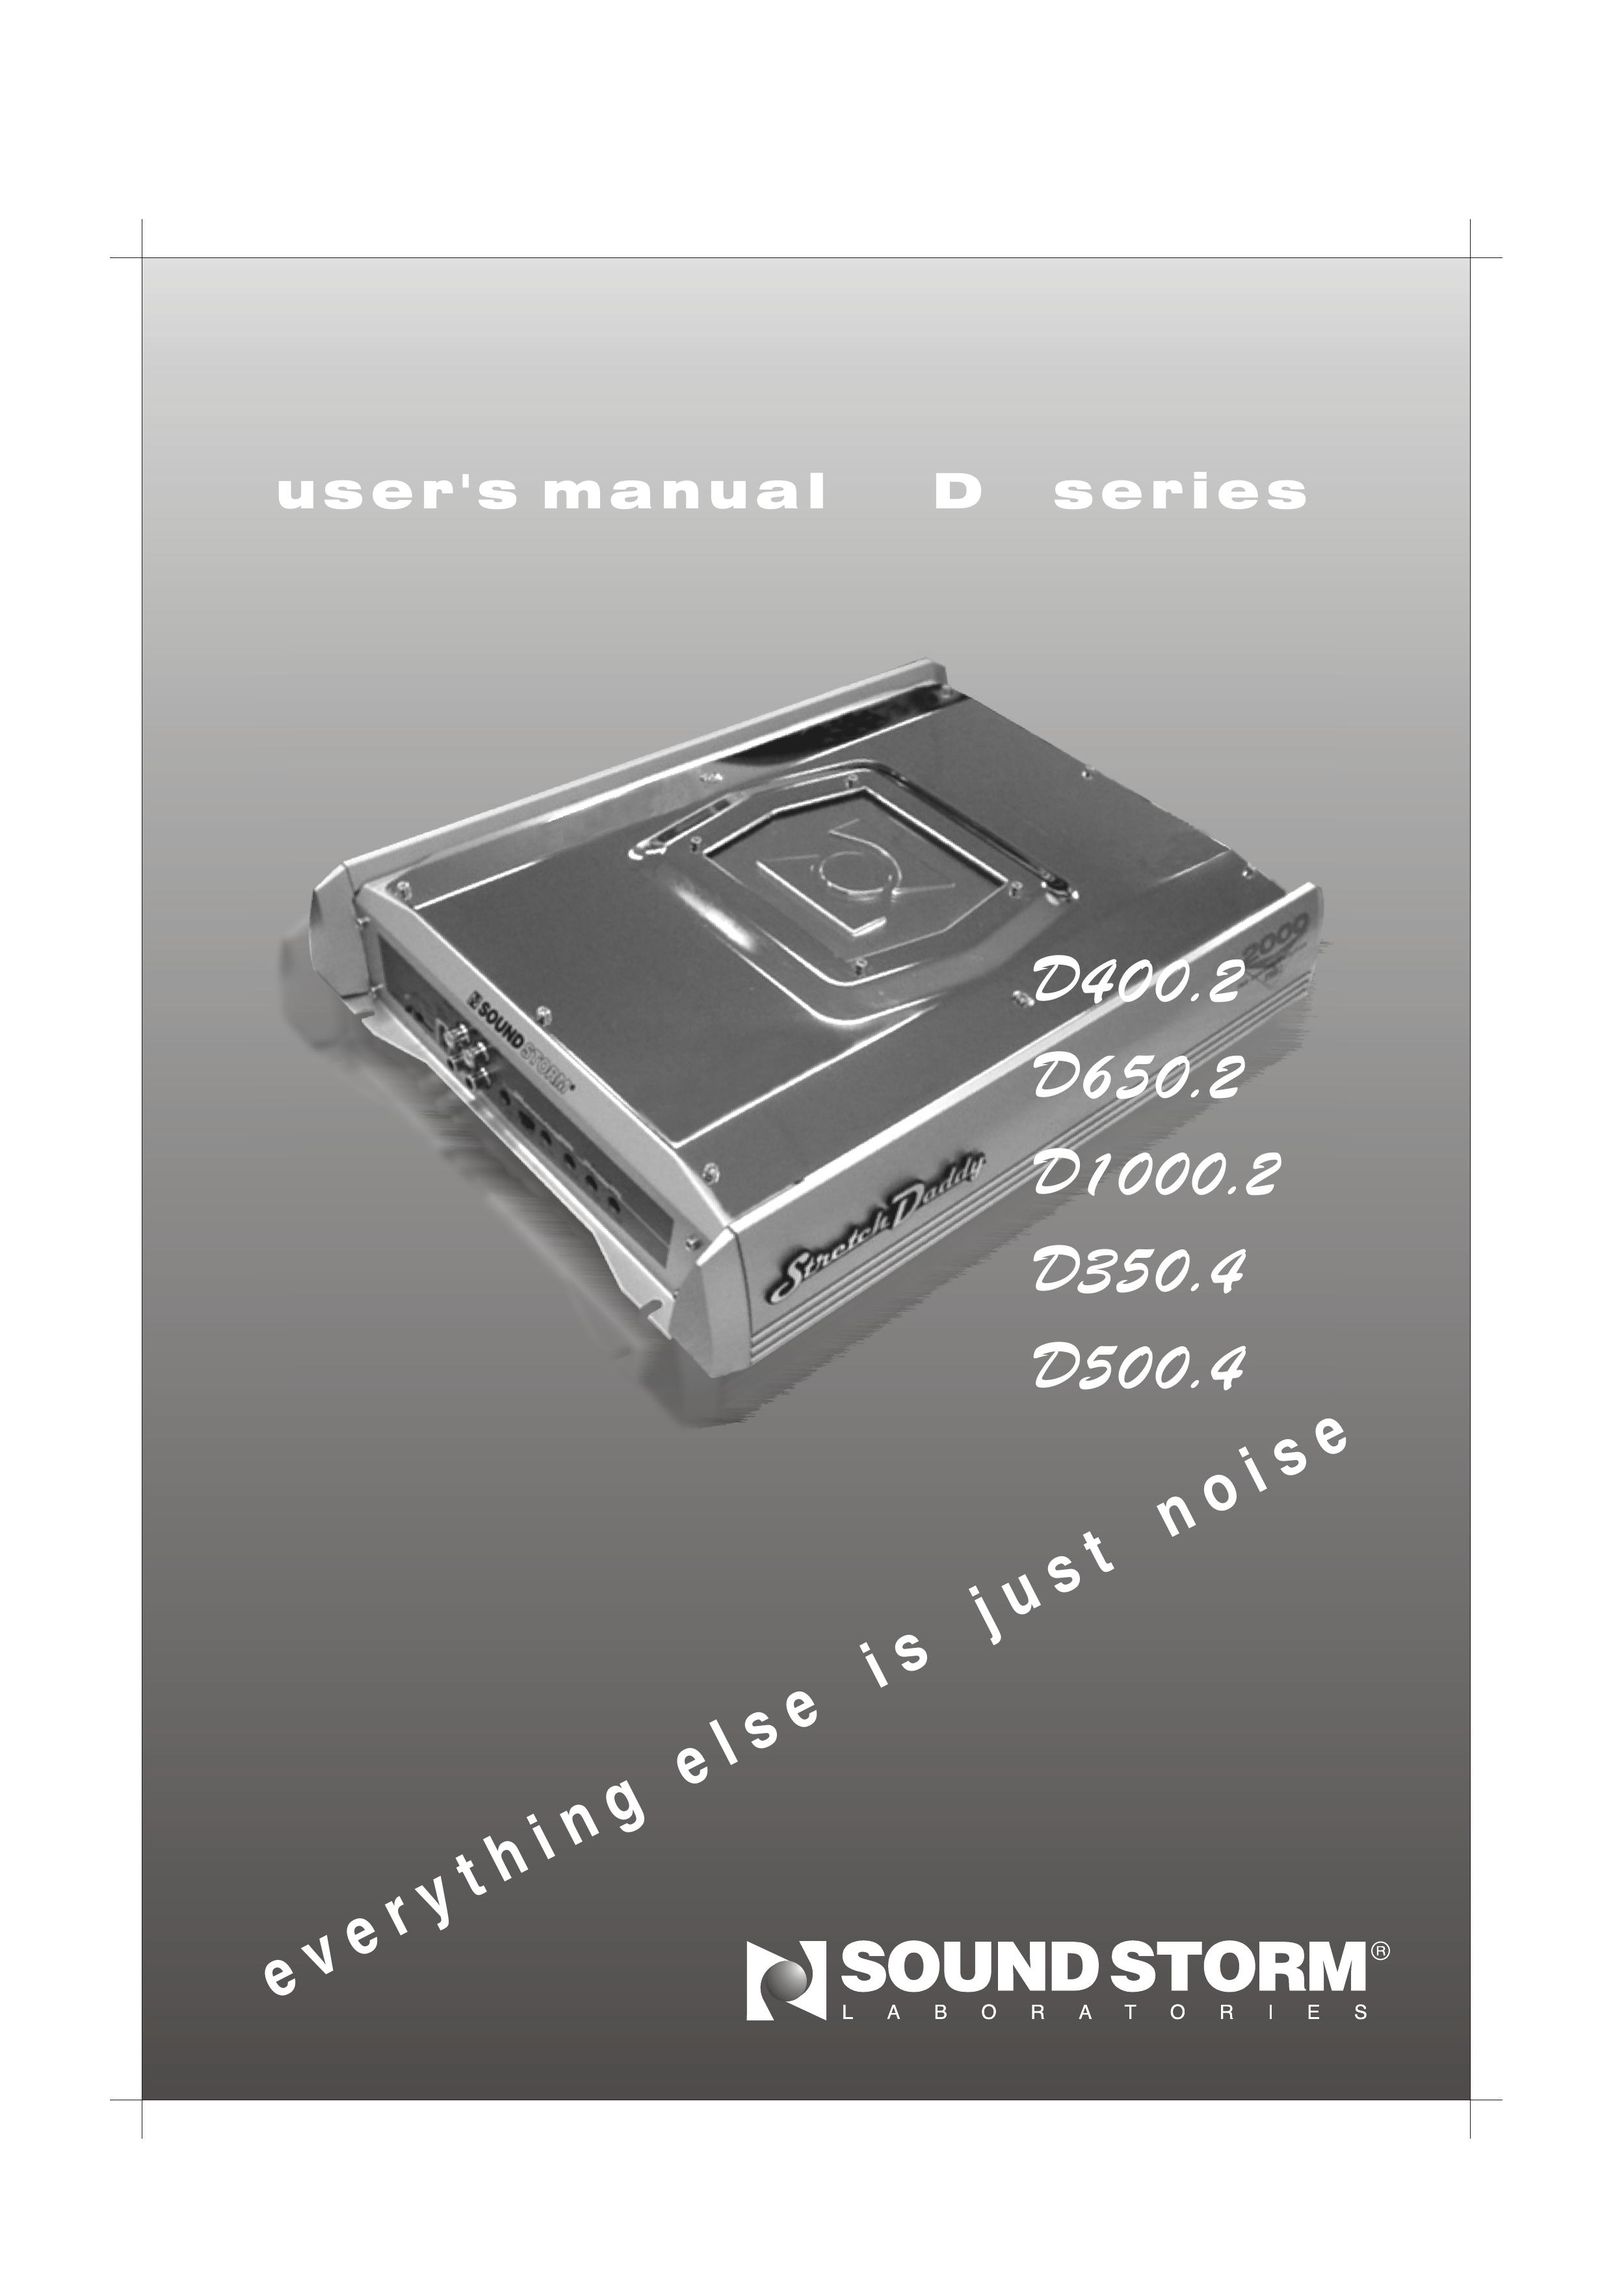 Sound Storm Laboratories D500.4 Stereo Amplifier User Manual